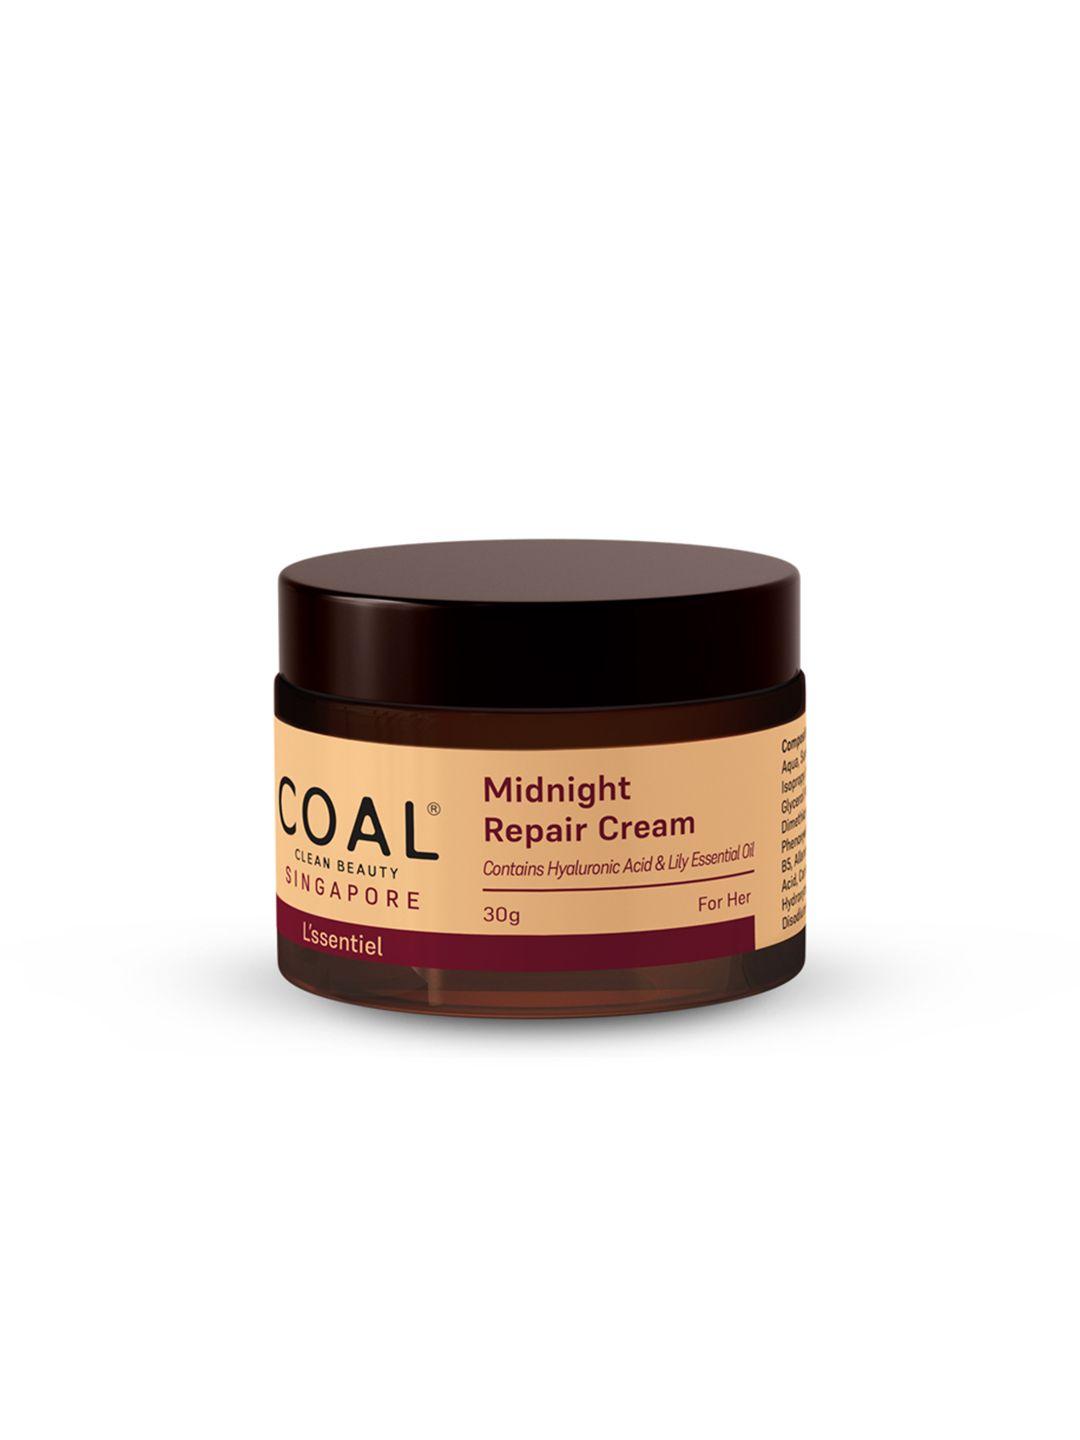 coal clean beauty singapore midnight repair cream with hyaluronic acid - 30g